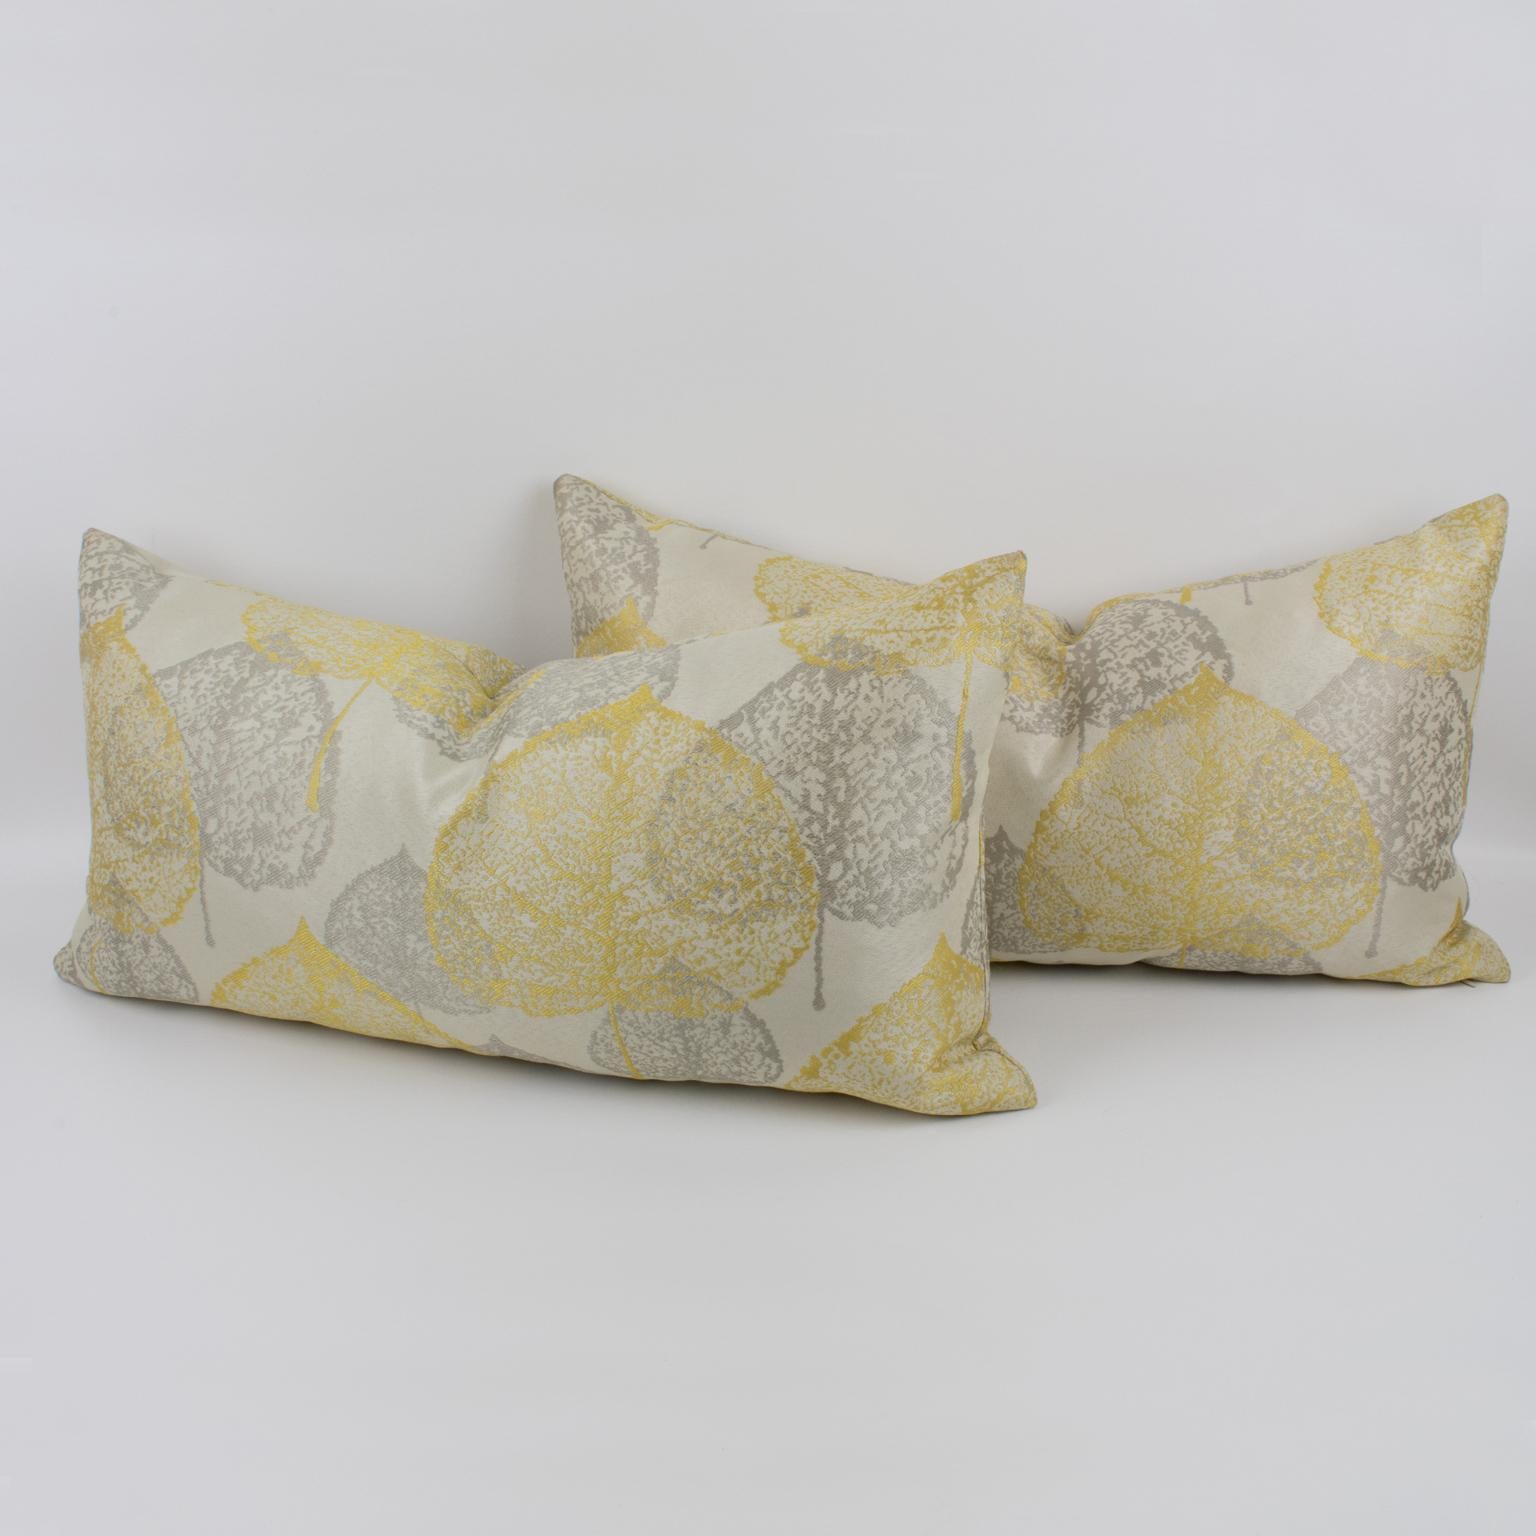 This is a lovely set of two damask throw pillows. These lumbar pillows are covered with a textured naturalist design in silver-gray and light yellow colors over a silky off-white background. A zipper encloses an inner feather pillow. Their